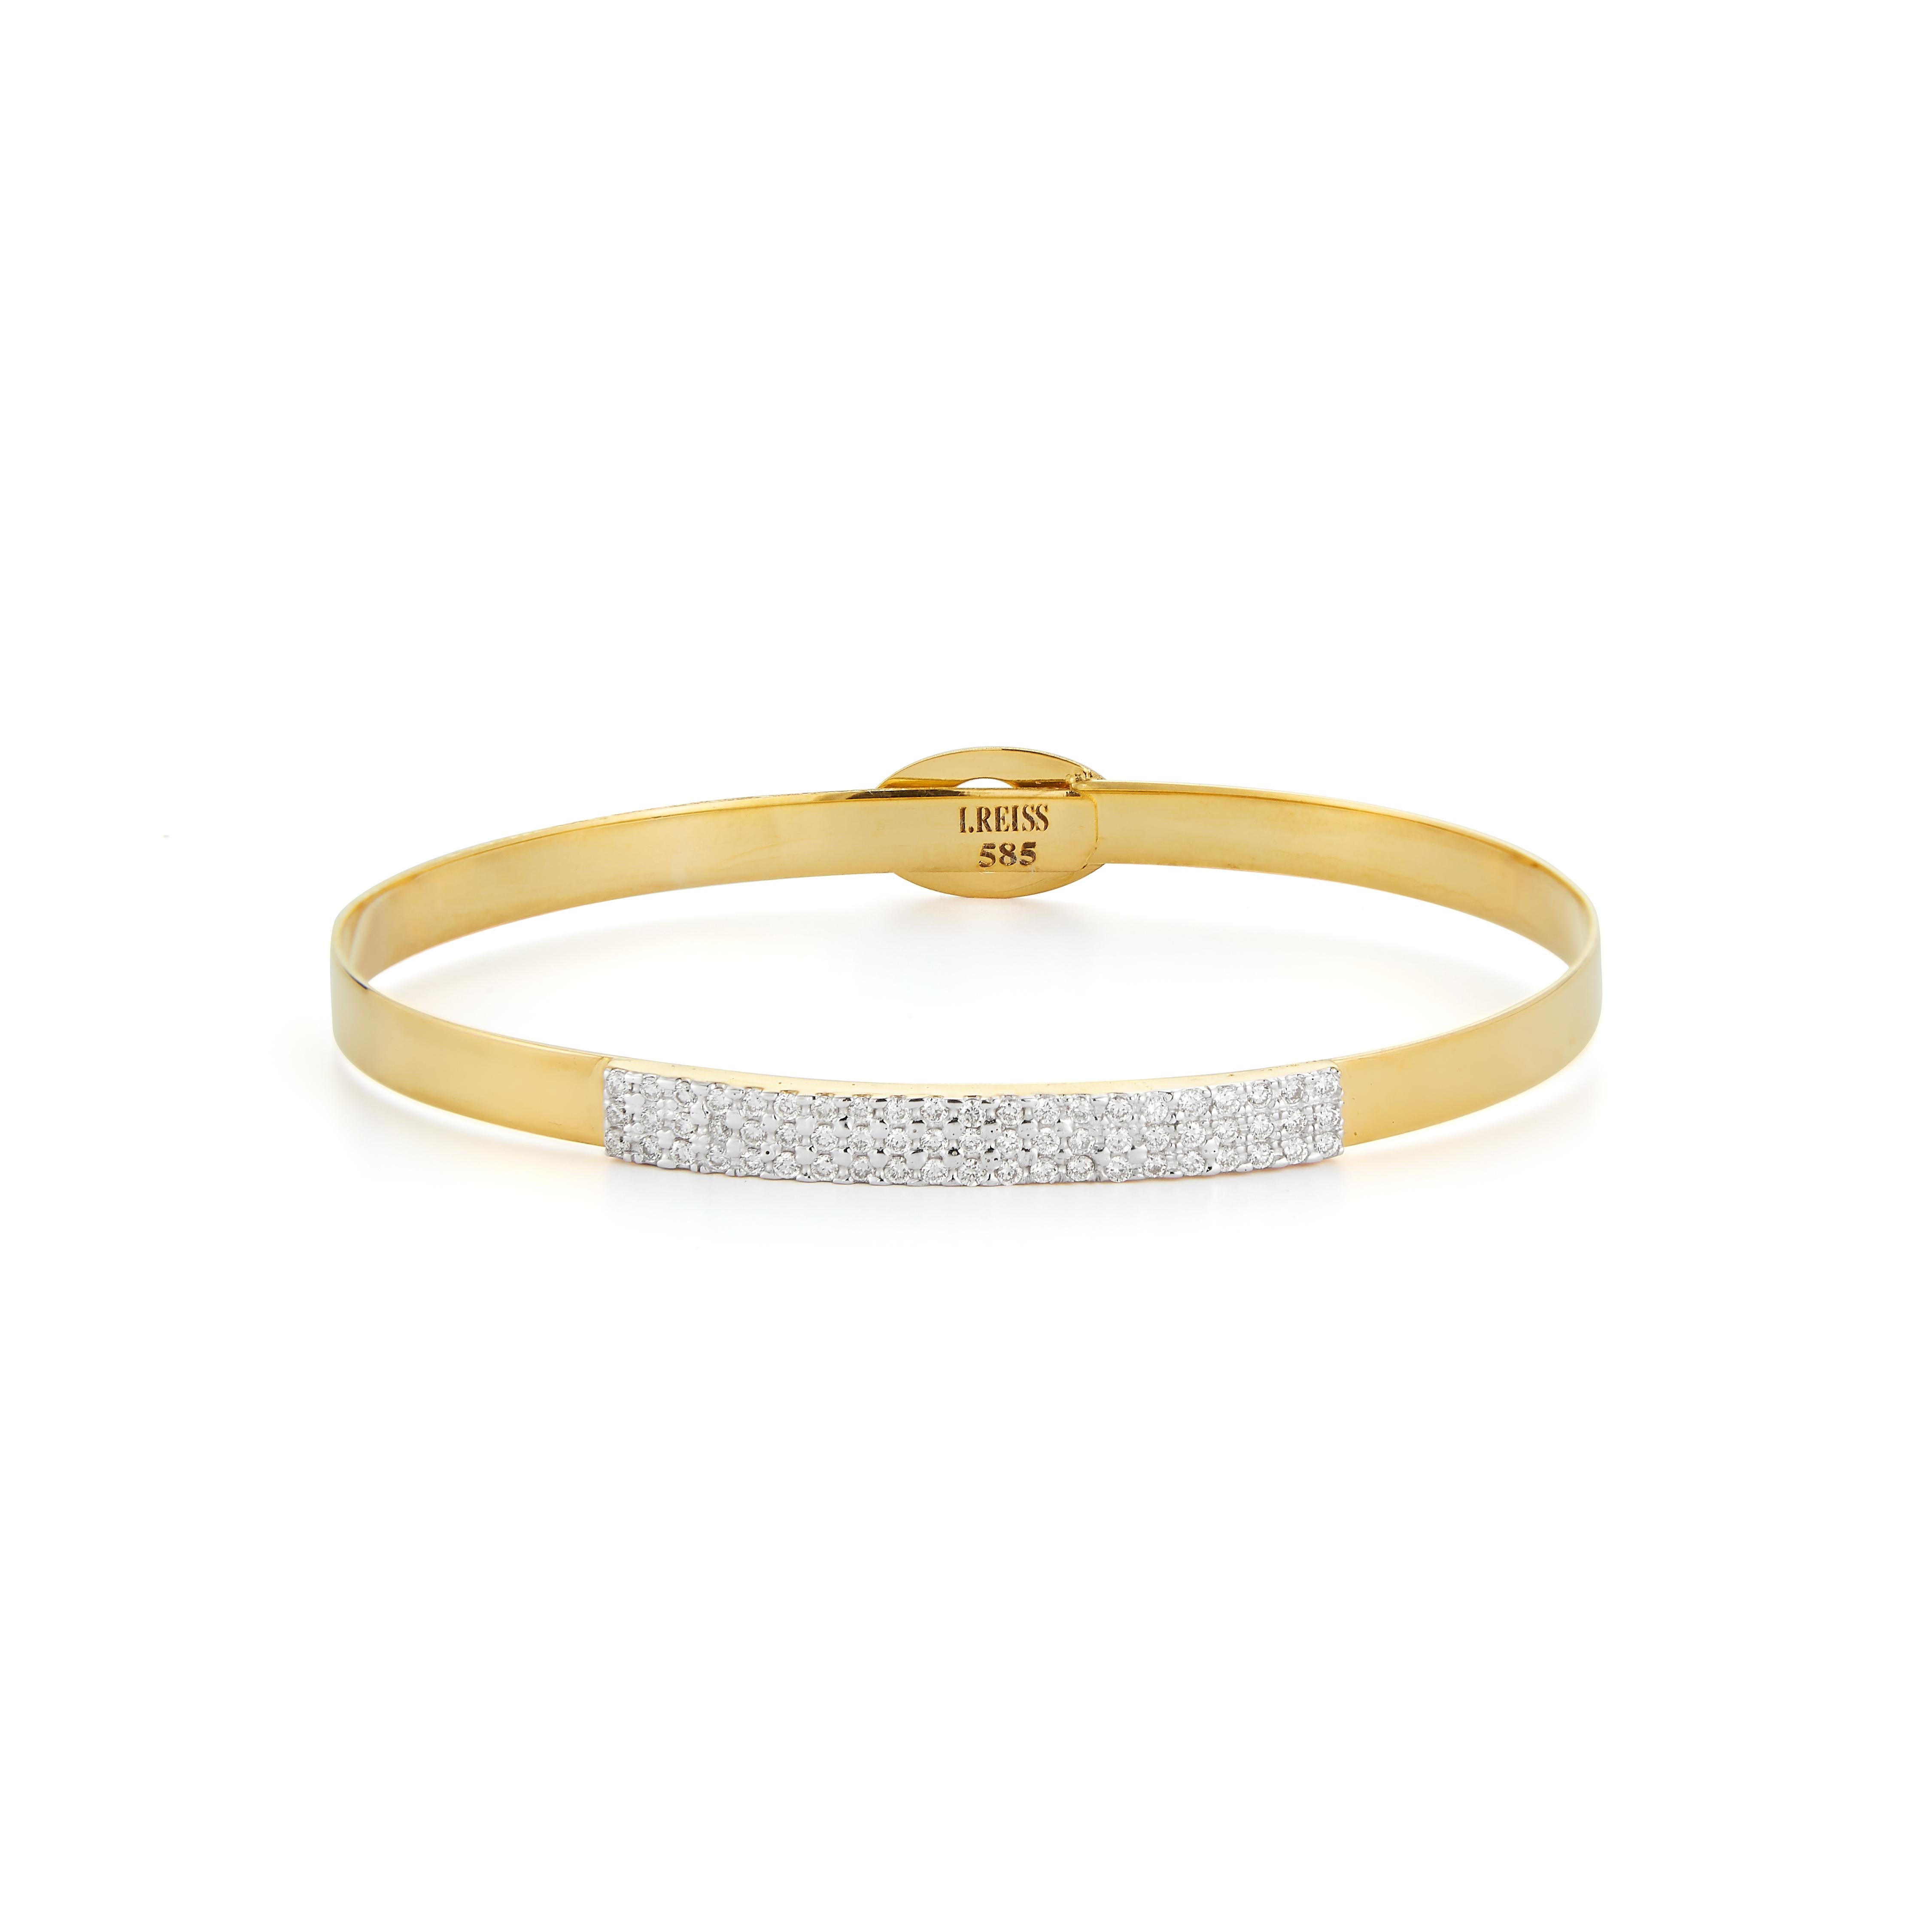 14 Karat Yellow Gold Hand-Crafted Matte and Hammer-Finished 3.5mm ID Bangle Bracelet, Enhanced with 0.50 Carats of Pave Set Diamonds.
